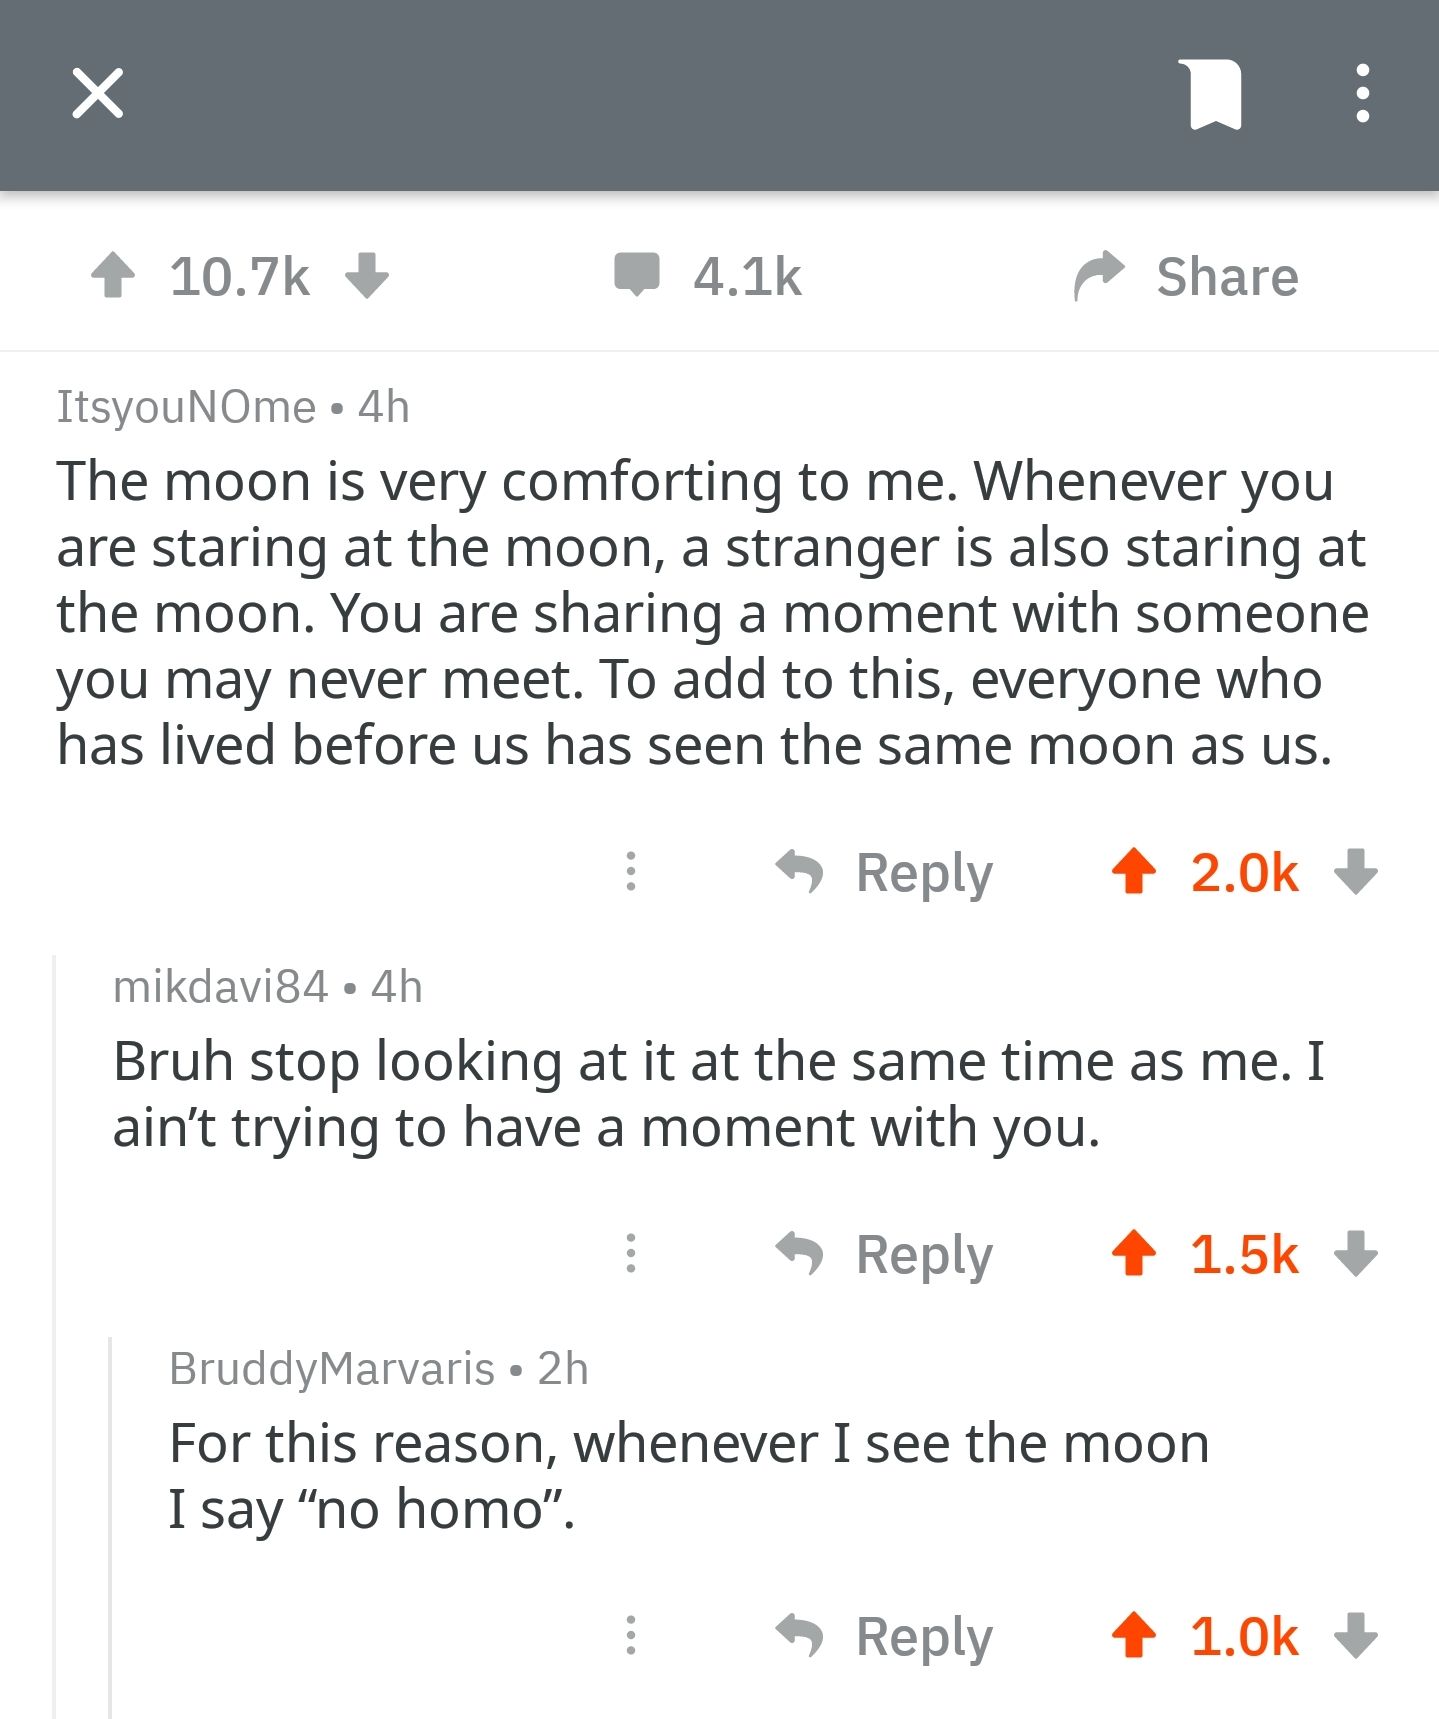 What is your opinion on the moon?